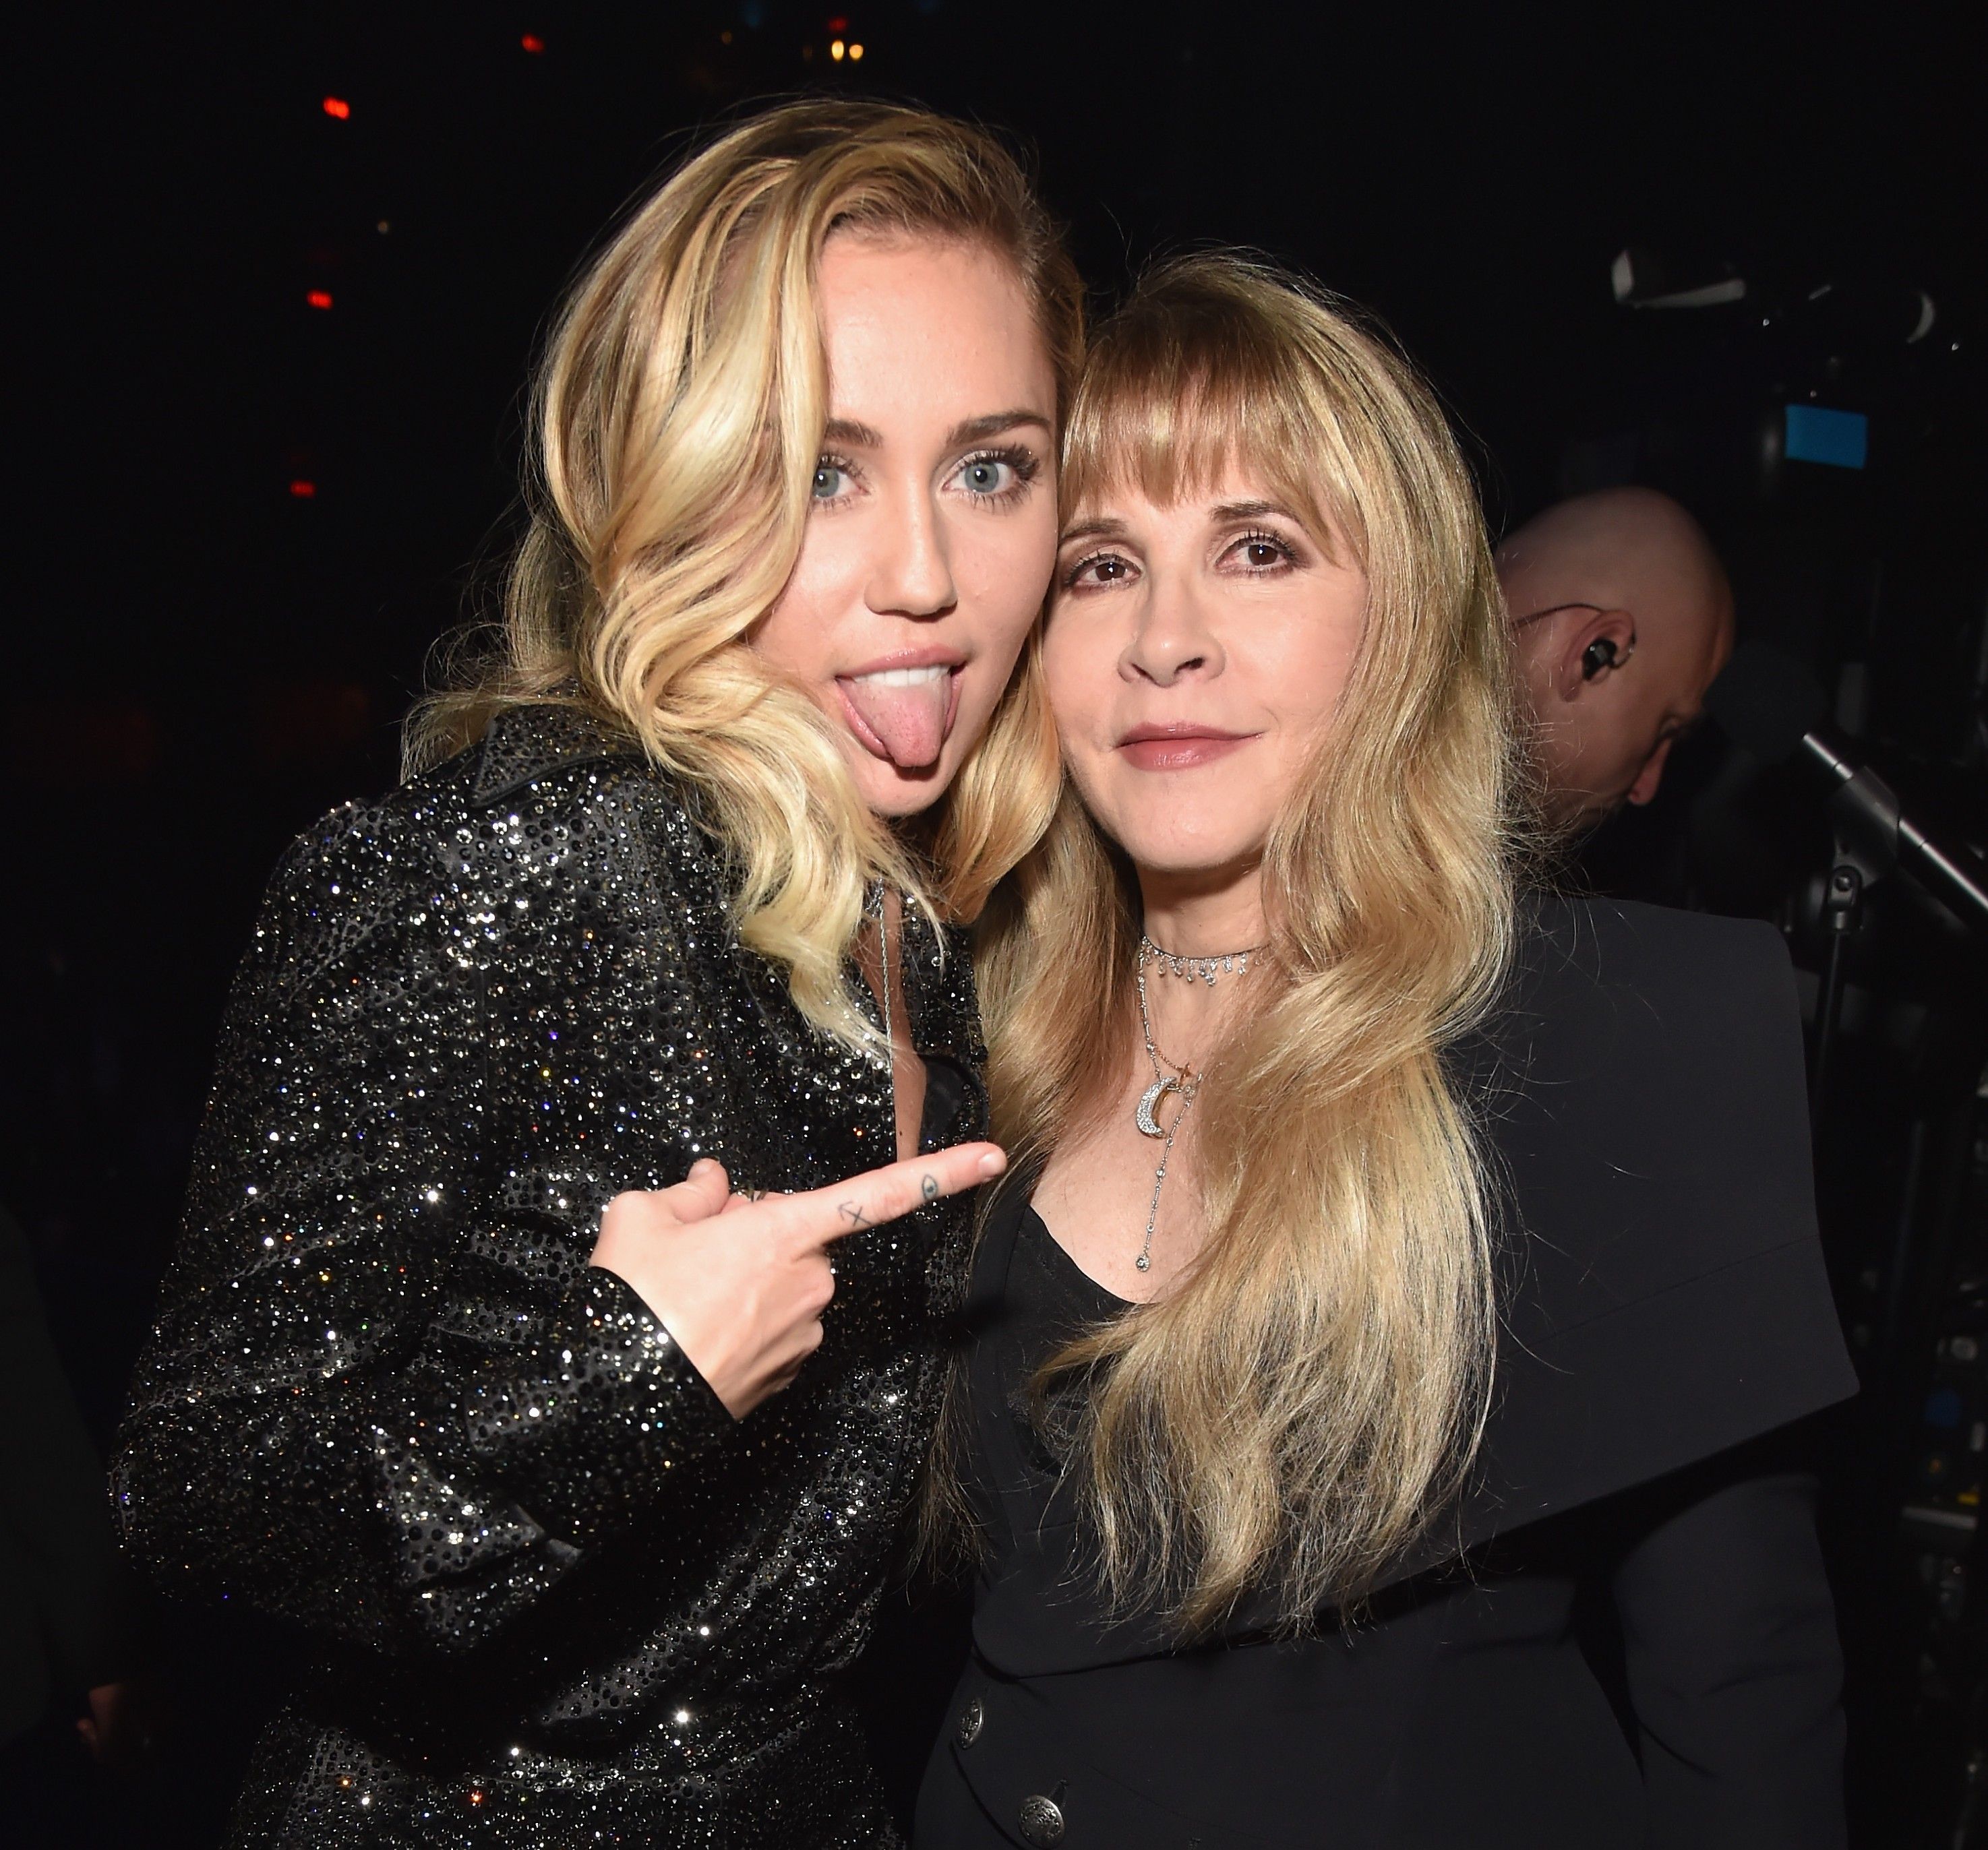 Miley Cyrus Drops 'Midnight Sky' Remix With Stevie Nicks